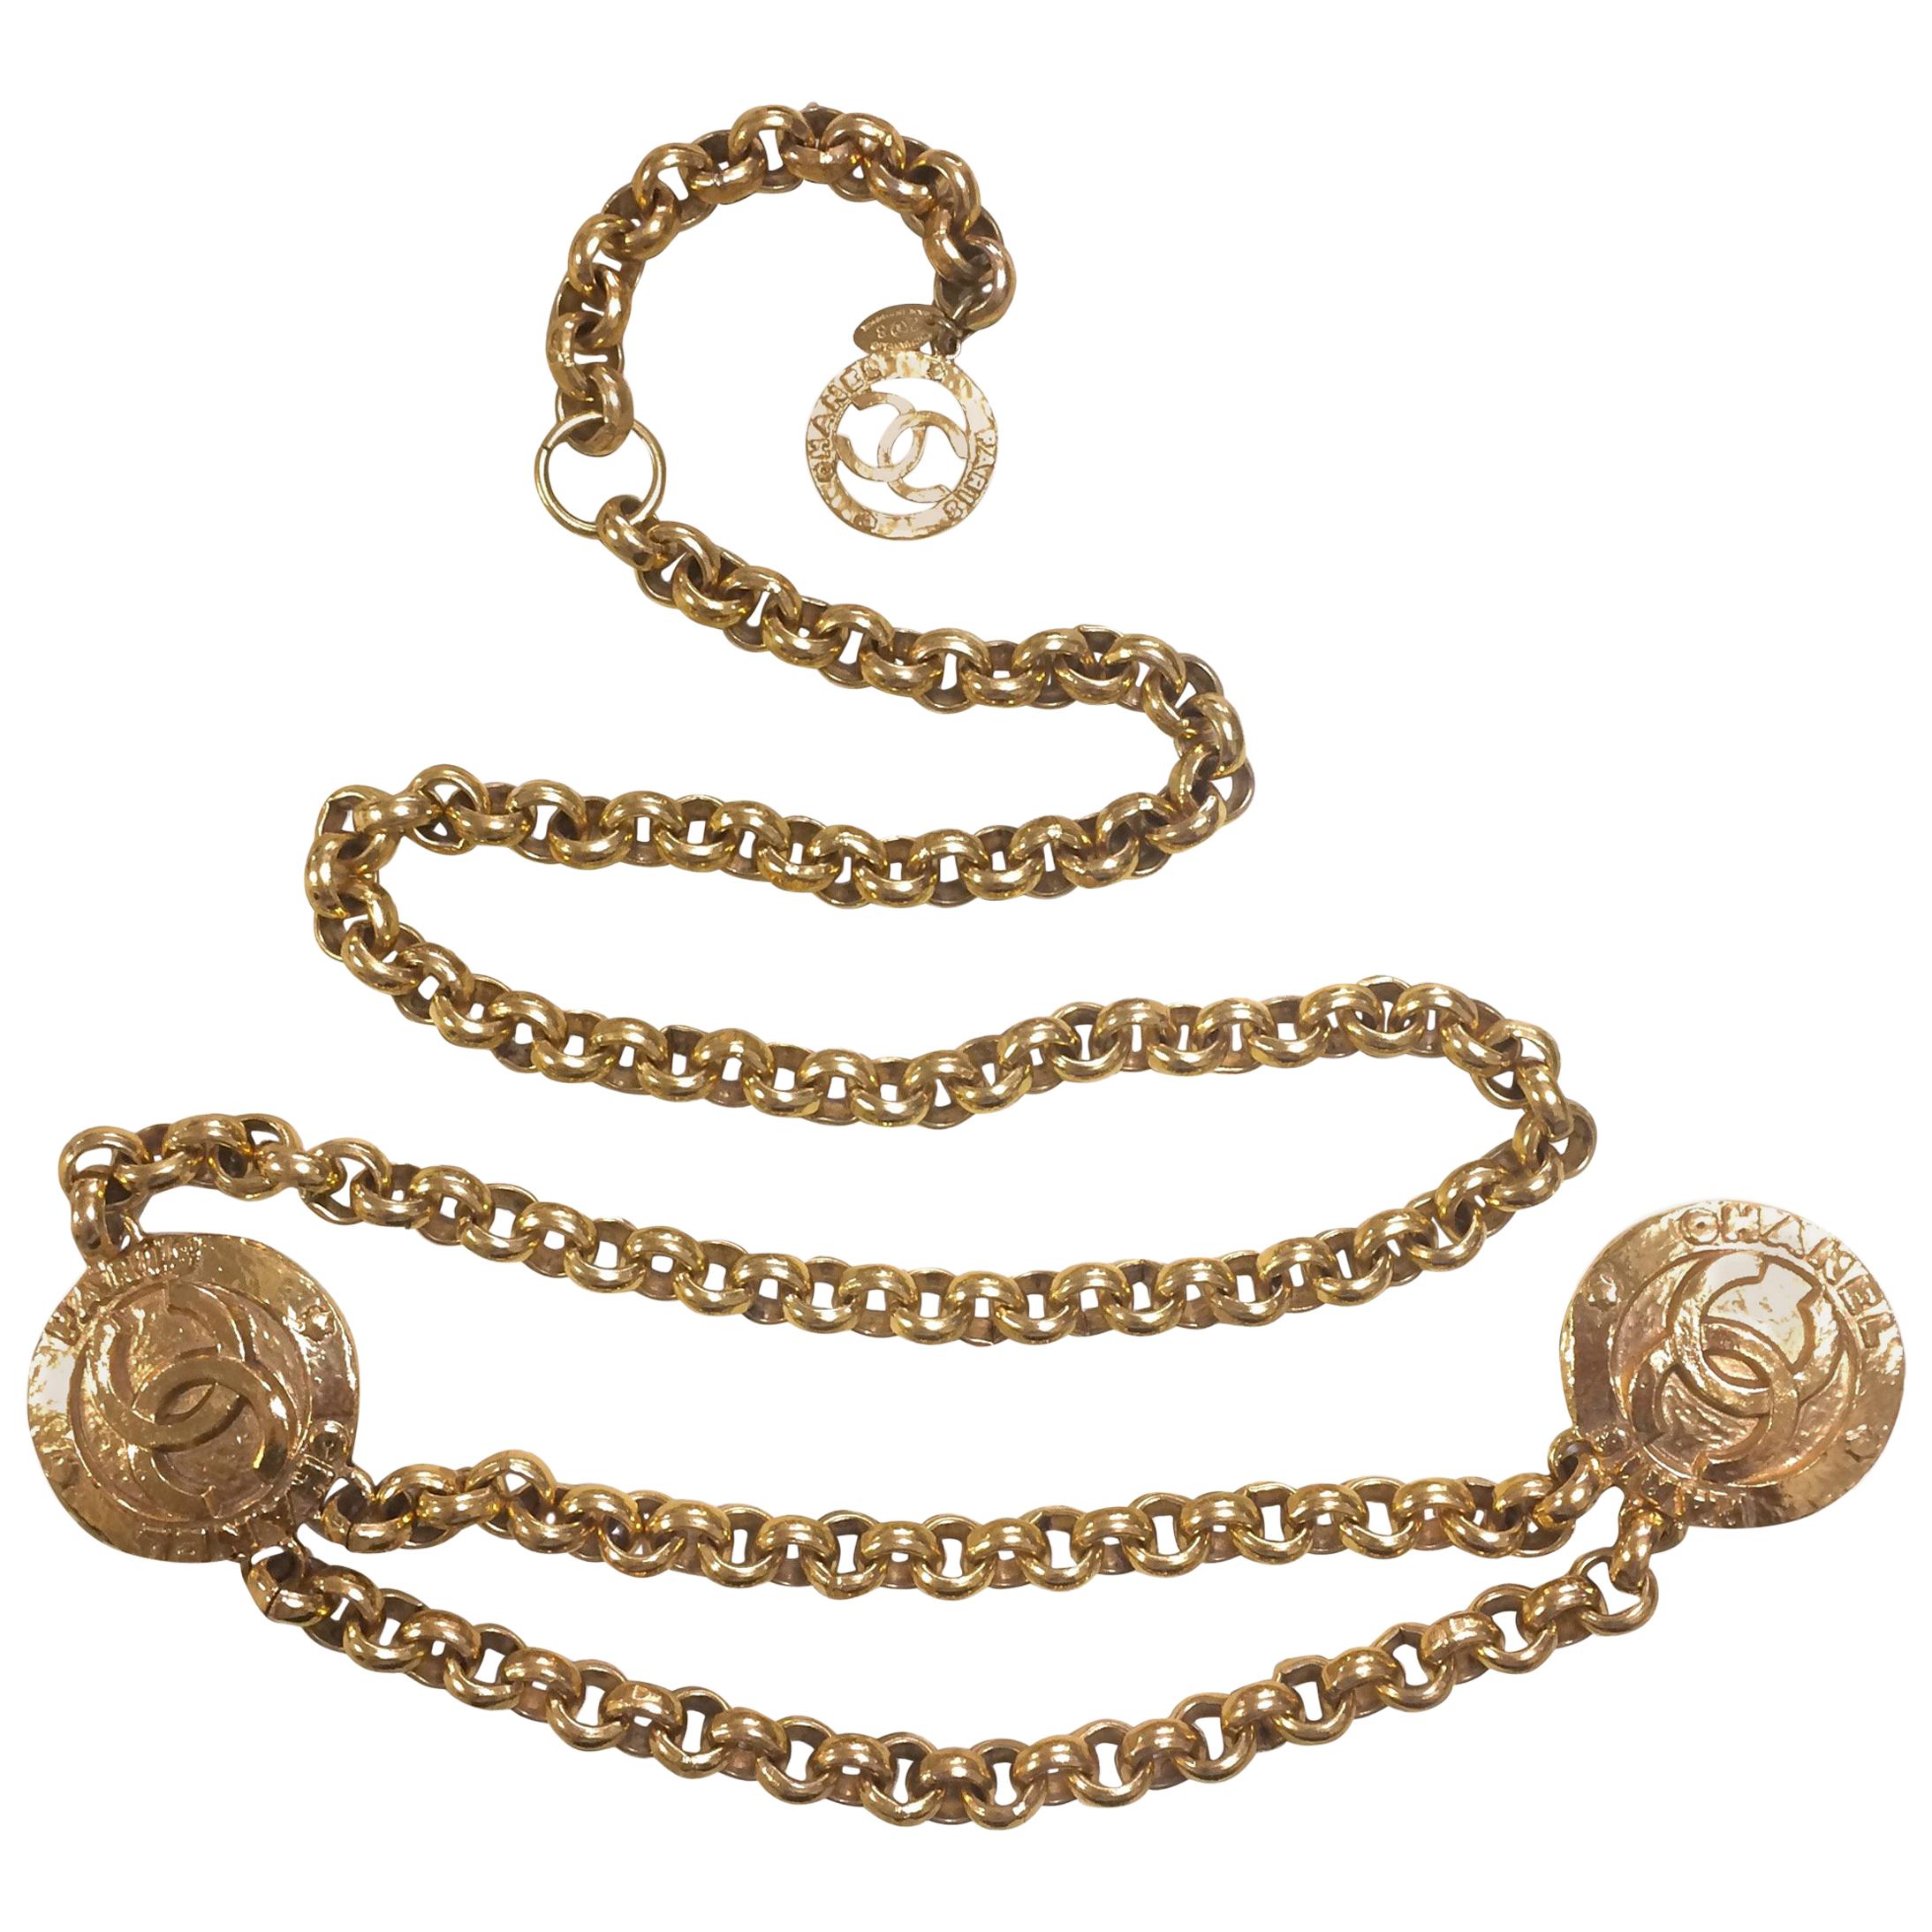 Vintage CHANEL nice and heavy golden chain belt with two large CC round charms.